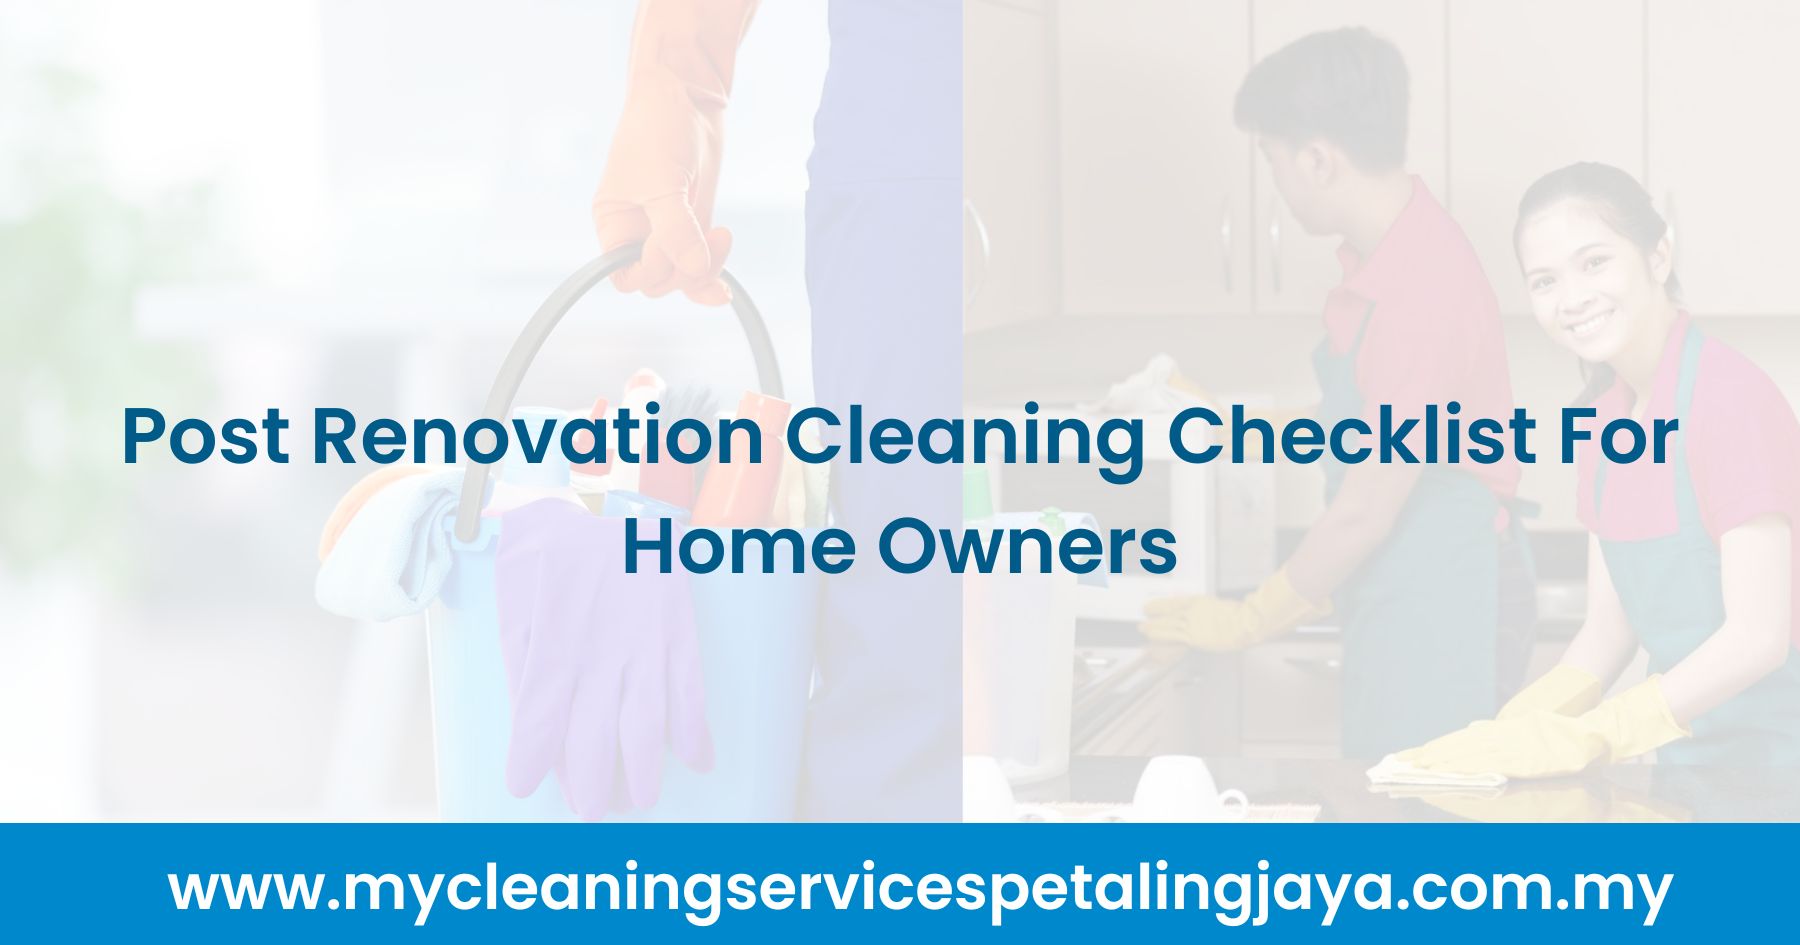 Post Renovation Cleaning Checklist For Home Owners